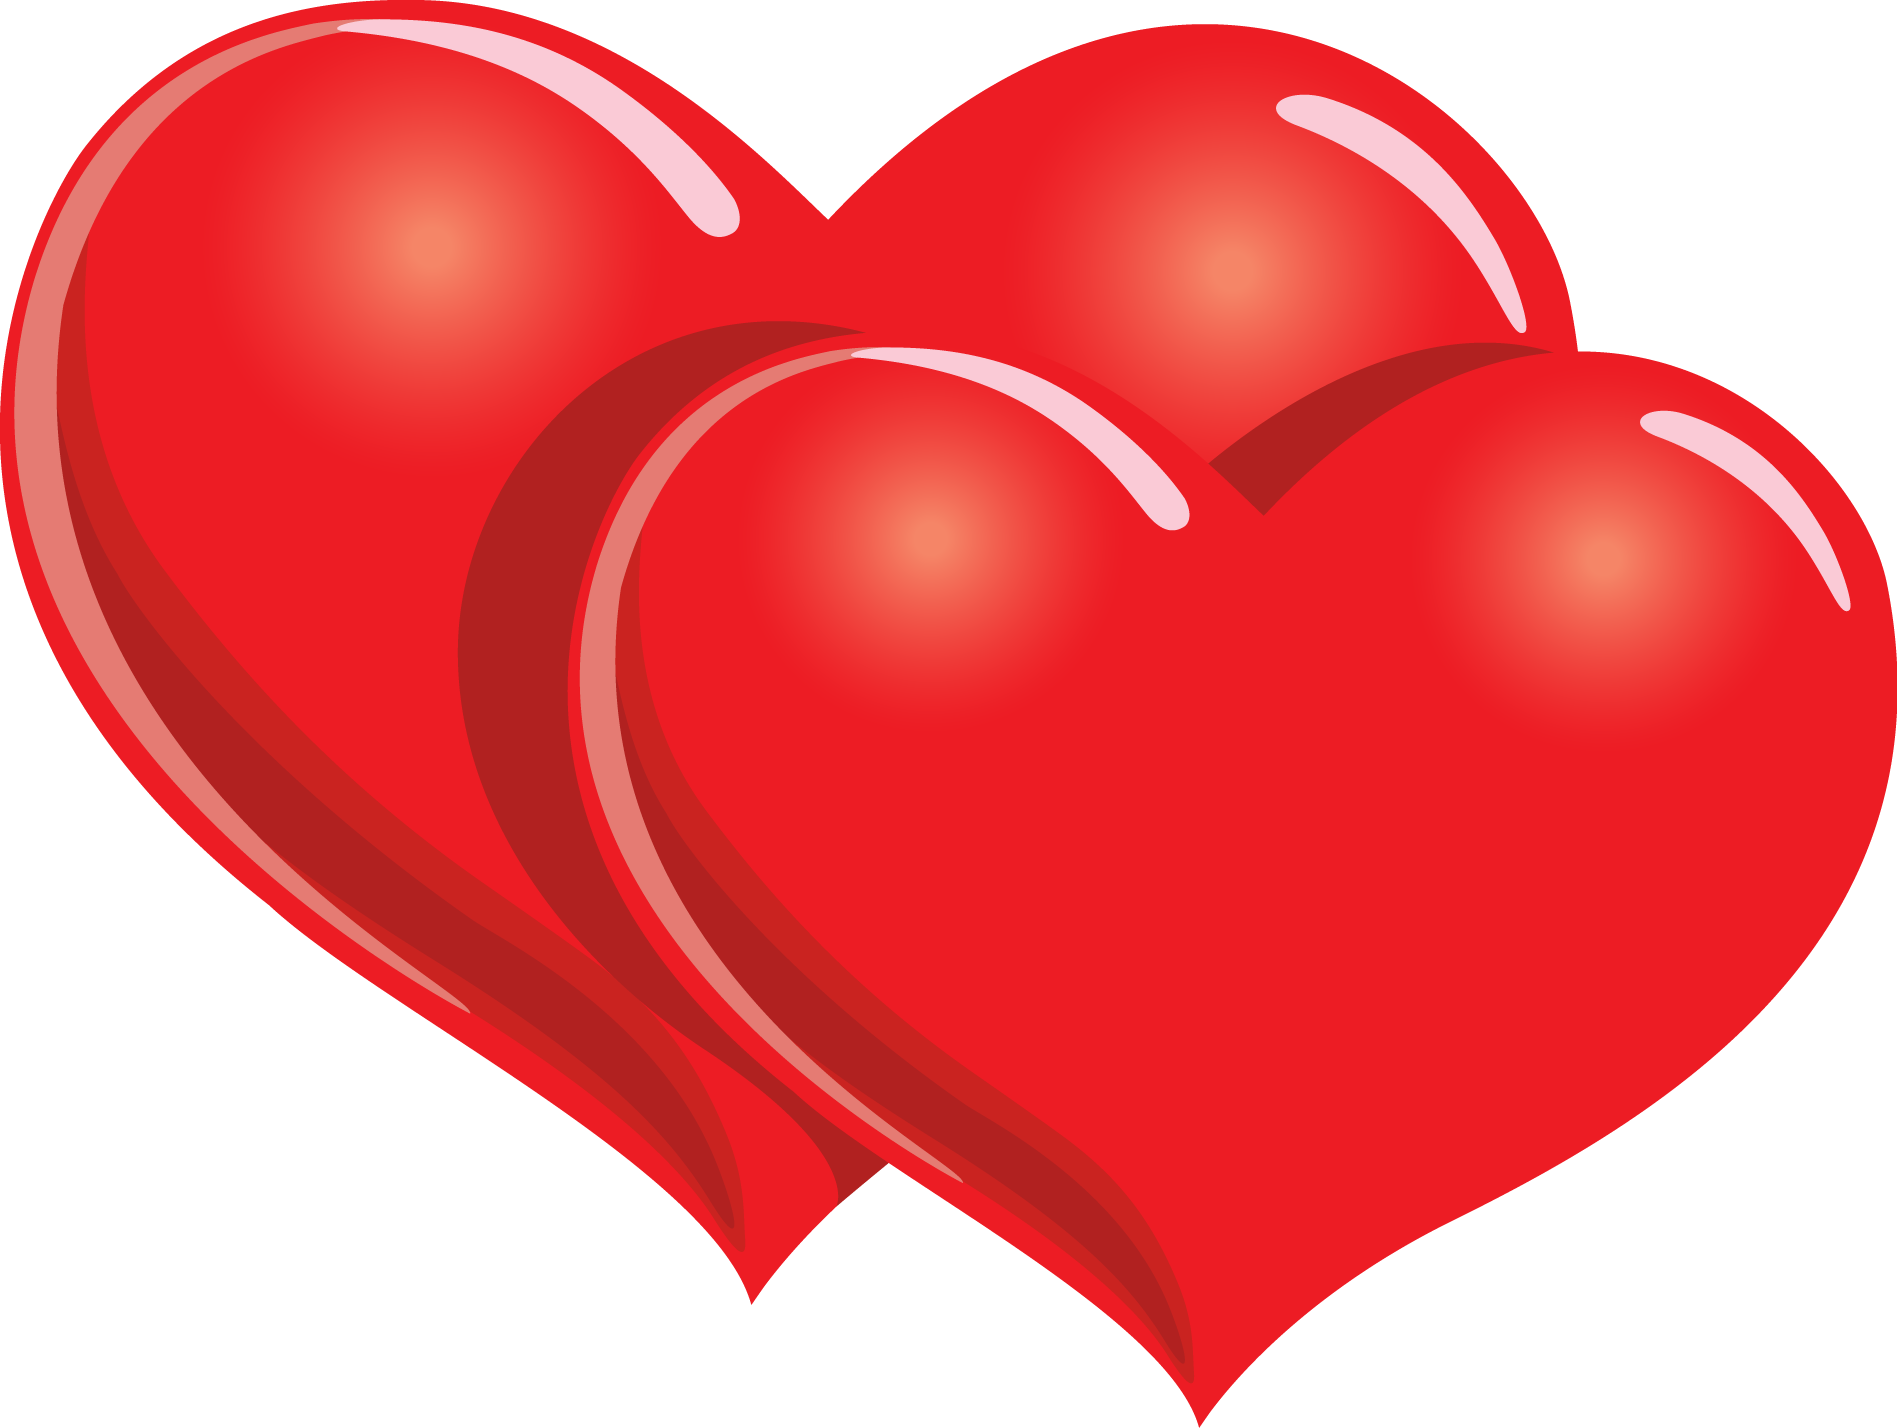 Two Red Hearts Clipart - Free Clipart Images